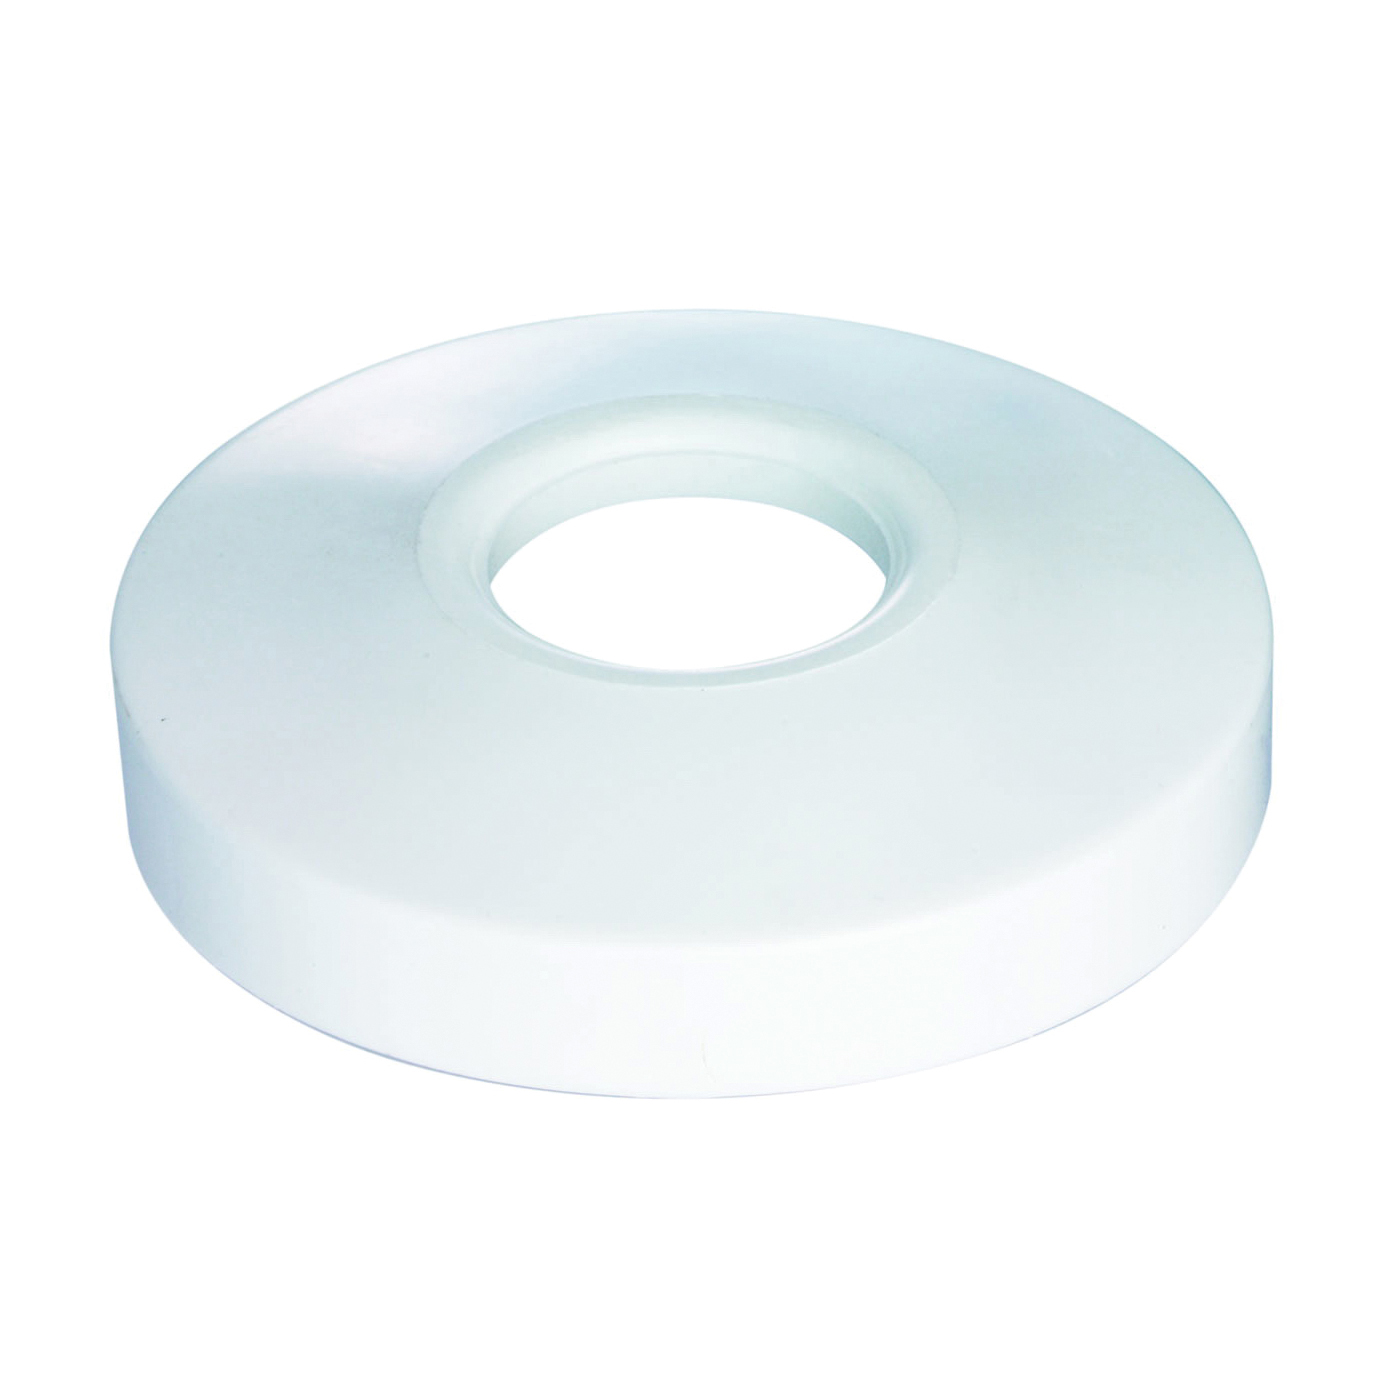 PP803-01 Bath Flange, 3-1/2 in OD, For: 3/4 in Pipes, Plastic, White